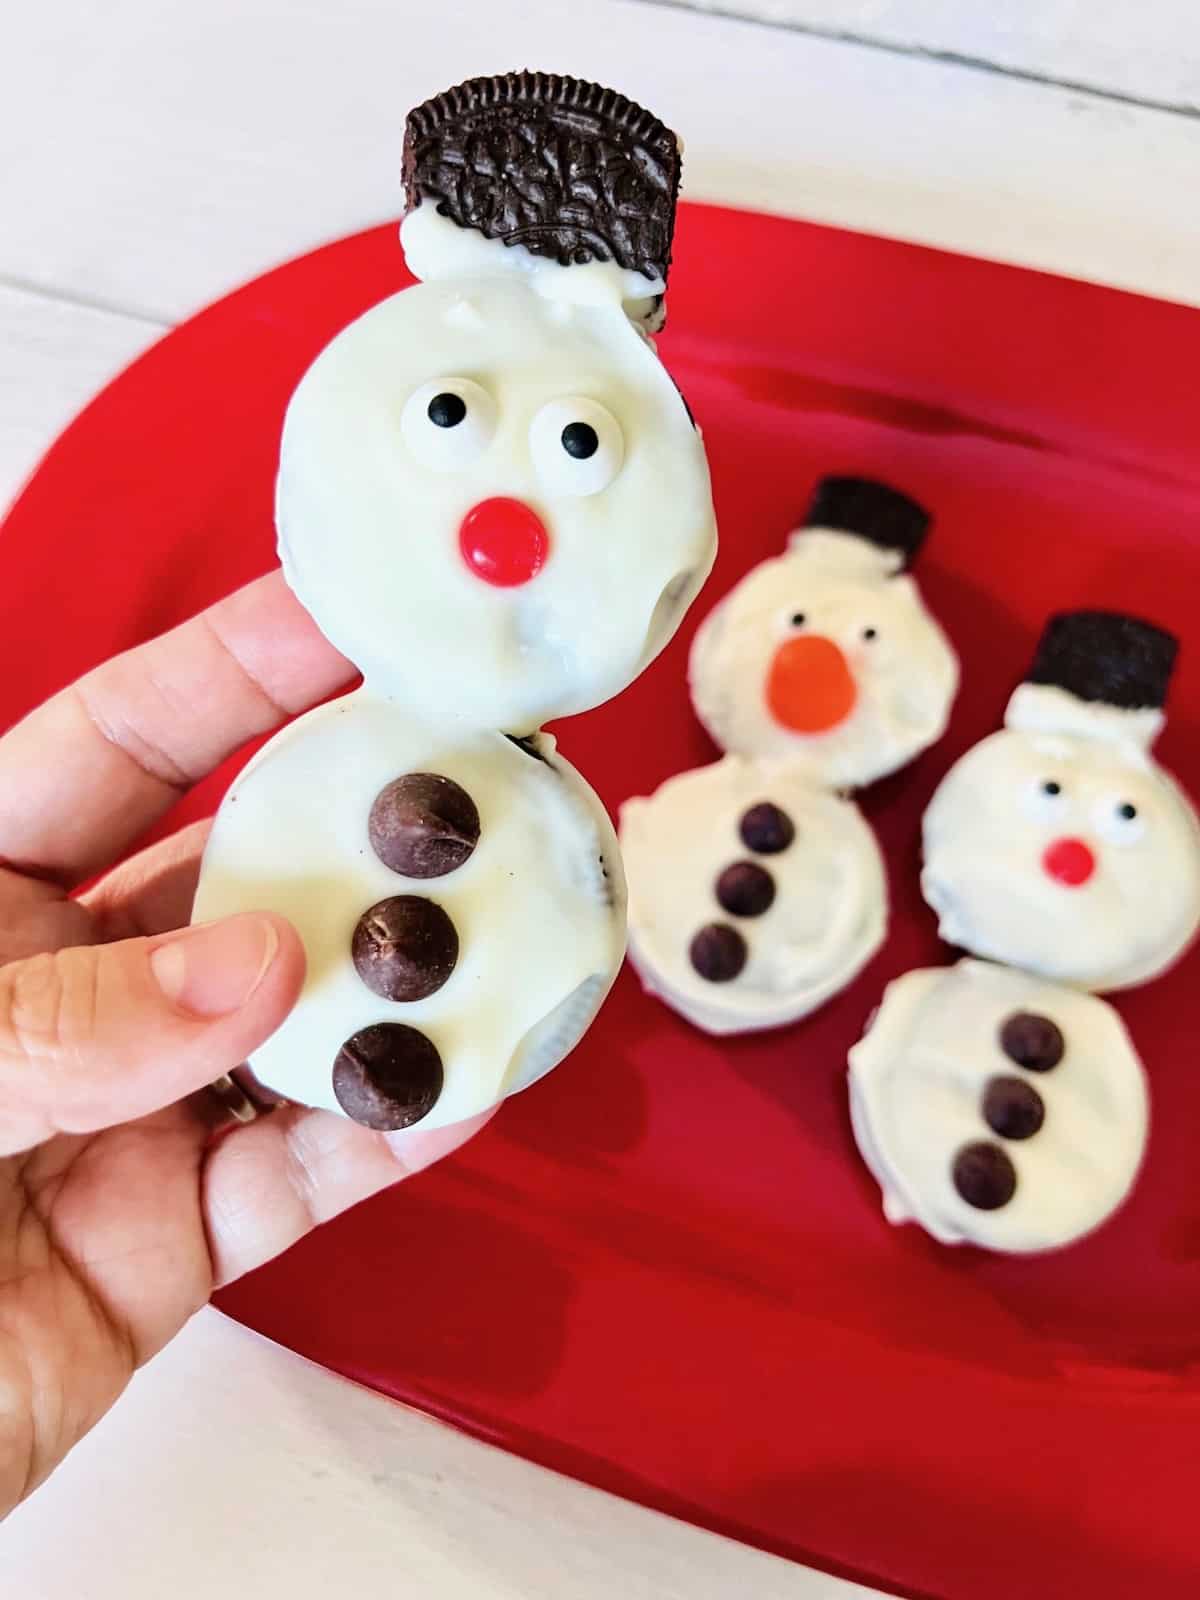 Decorate with different candies to look like snowmen cookies. 